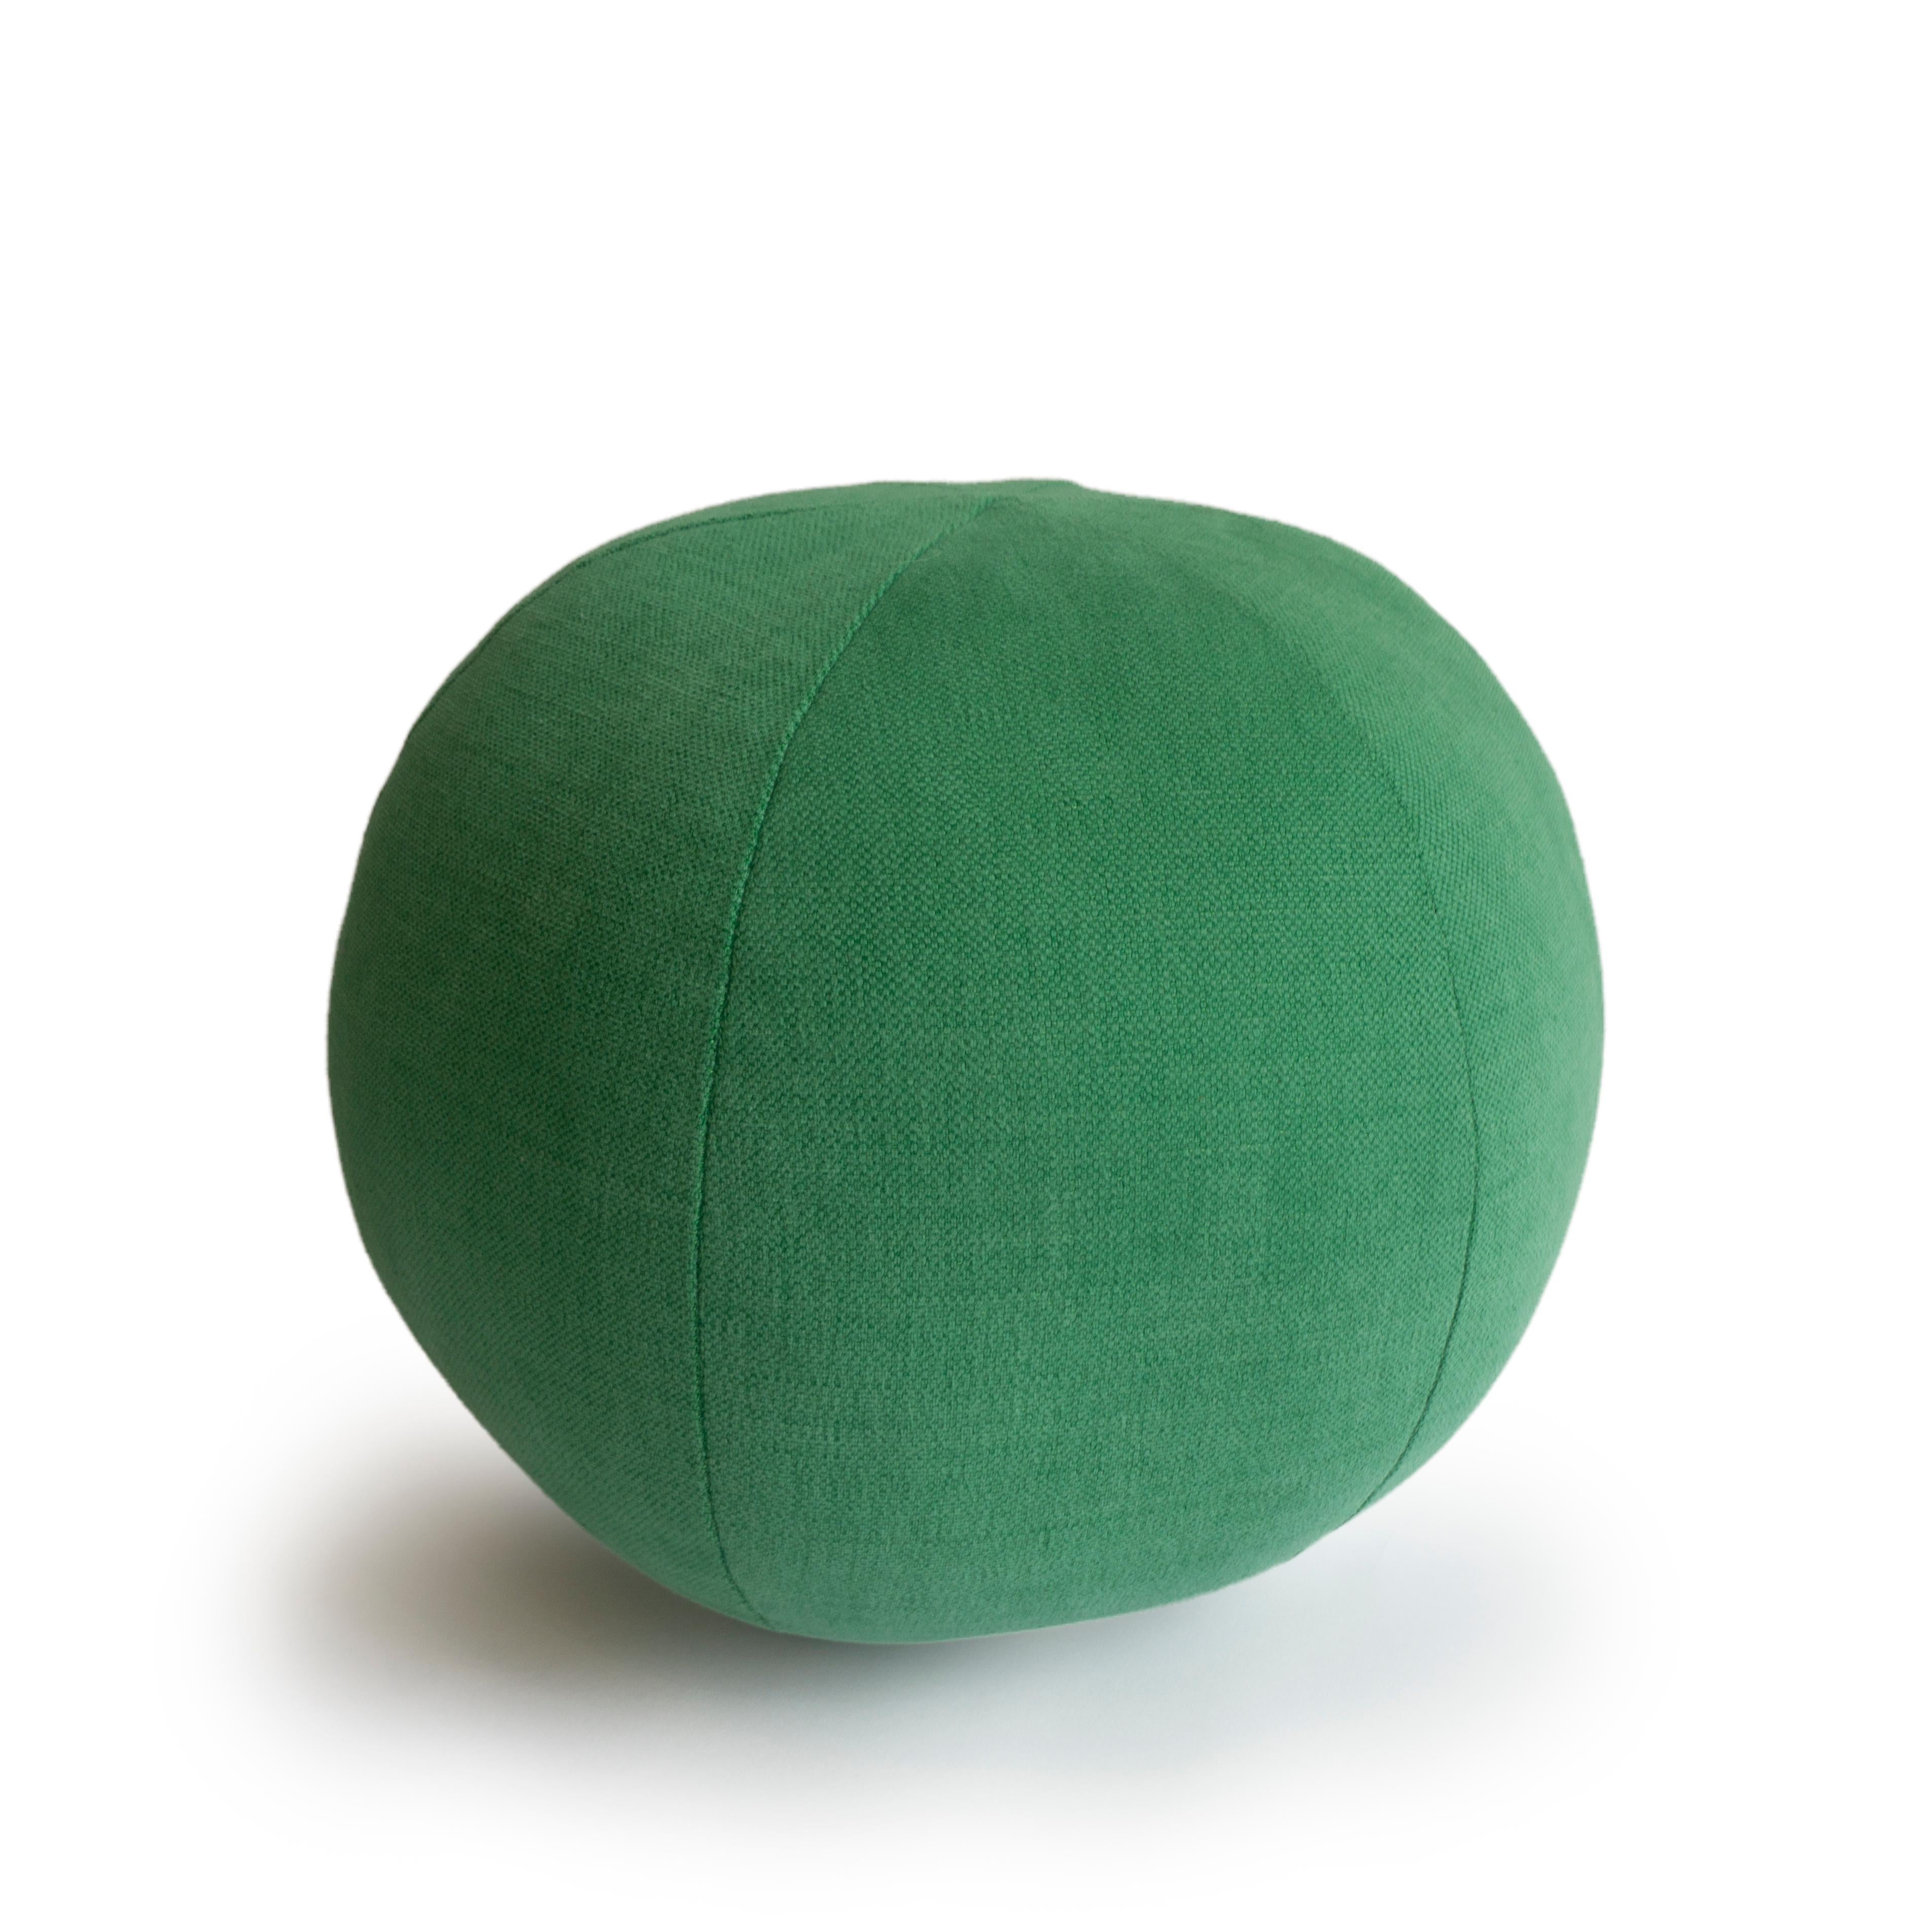 This hand sewn round ball throw pillow was handmade in a green cotton fabric. All pillows are made at our studio in Norwalk, Connecticut. 
Made to Order.

Measurements: 9